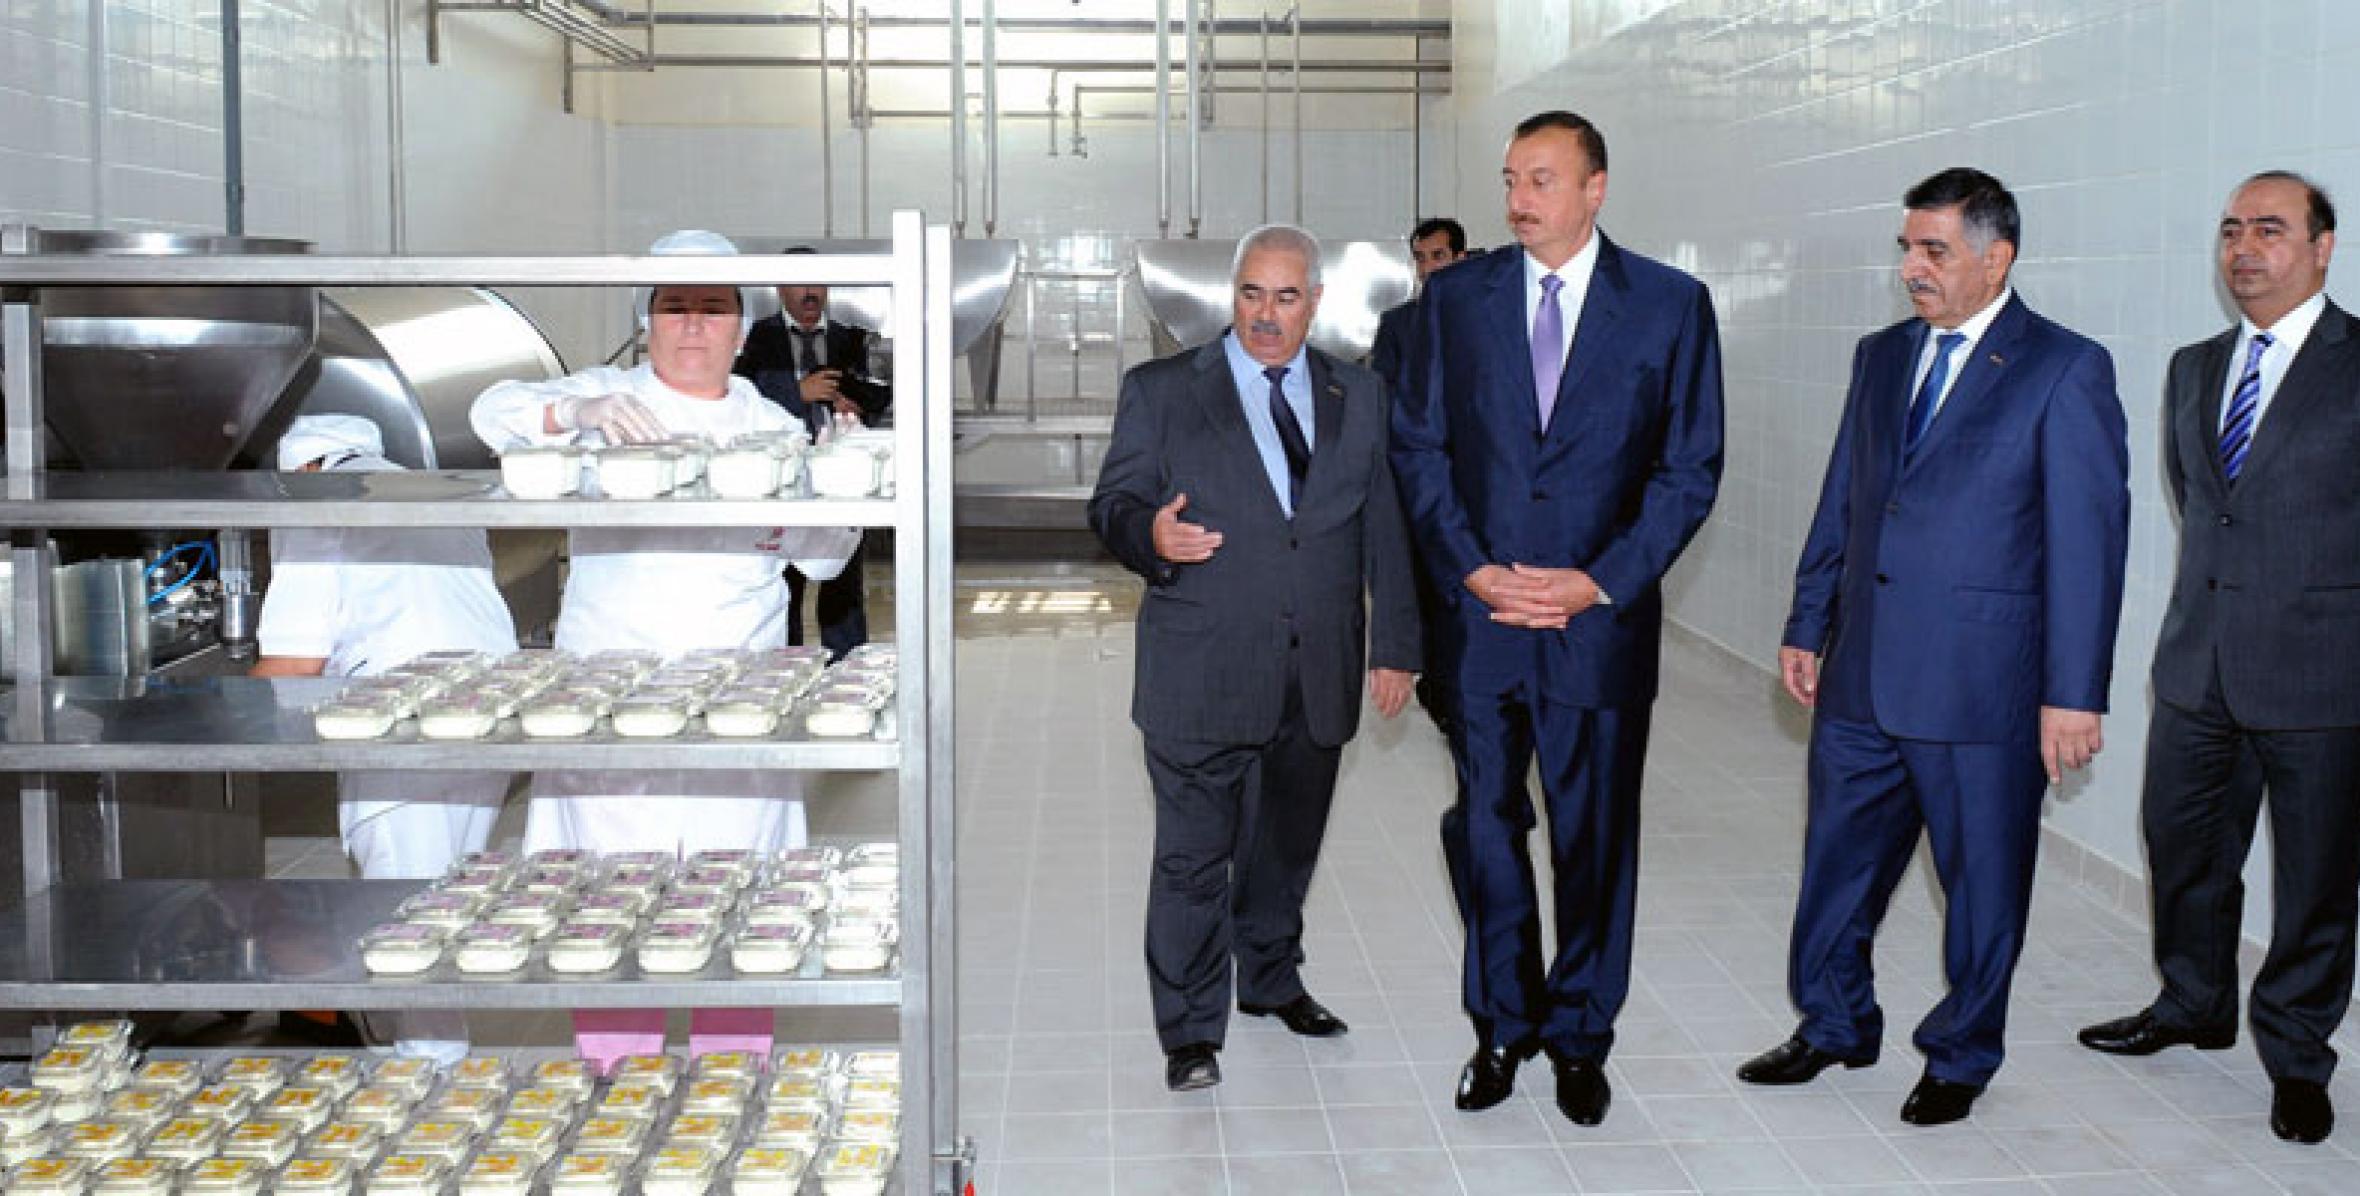 Ilham Aliyev attended the opening ceremony of Zagatala dairy processing plant